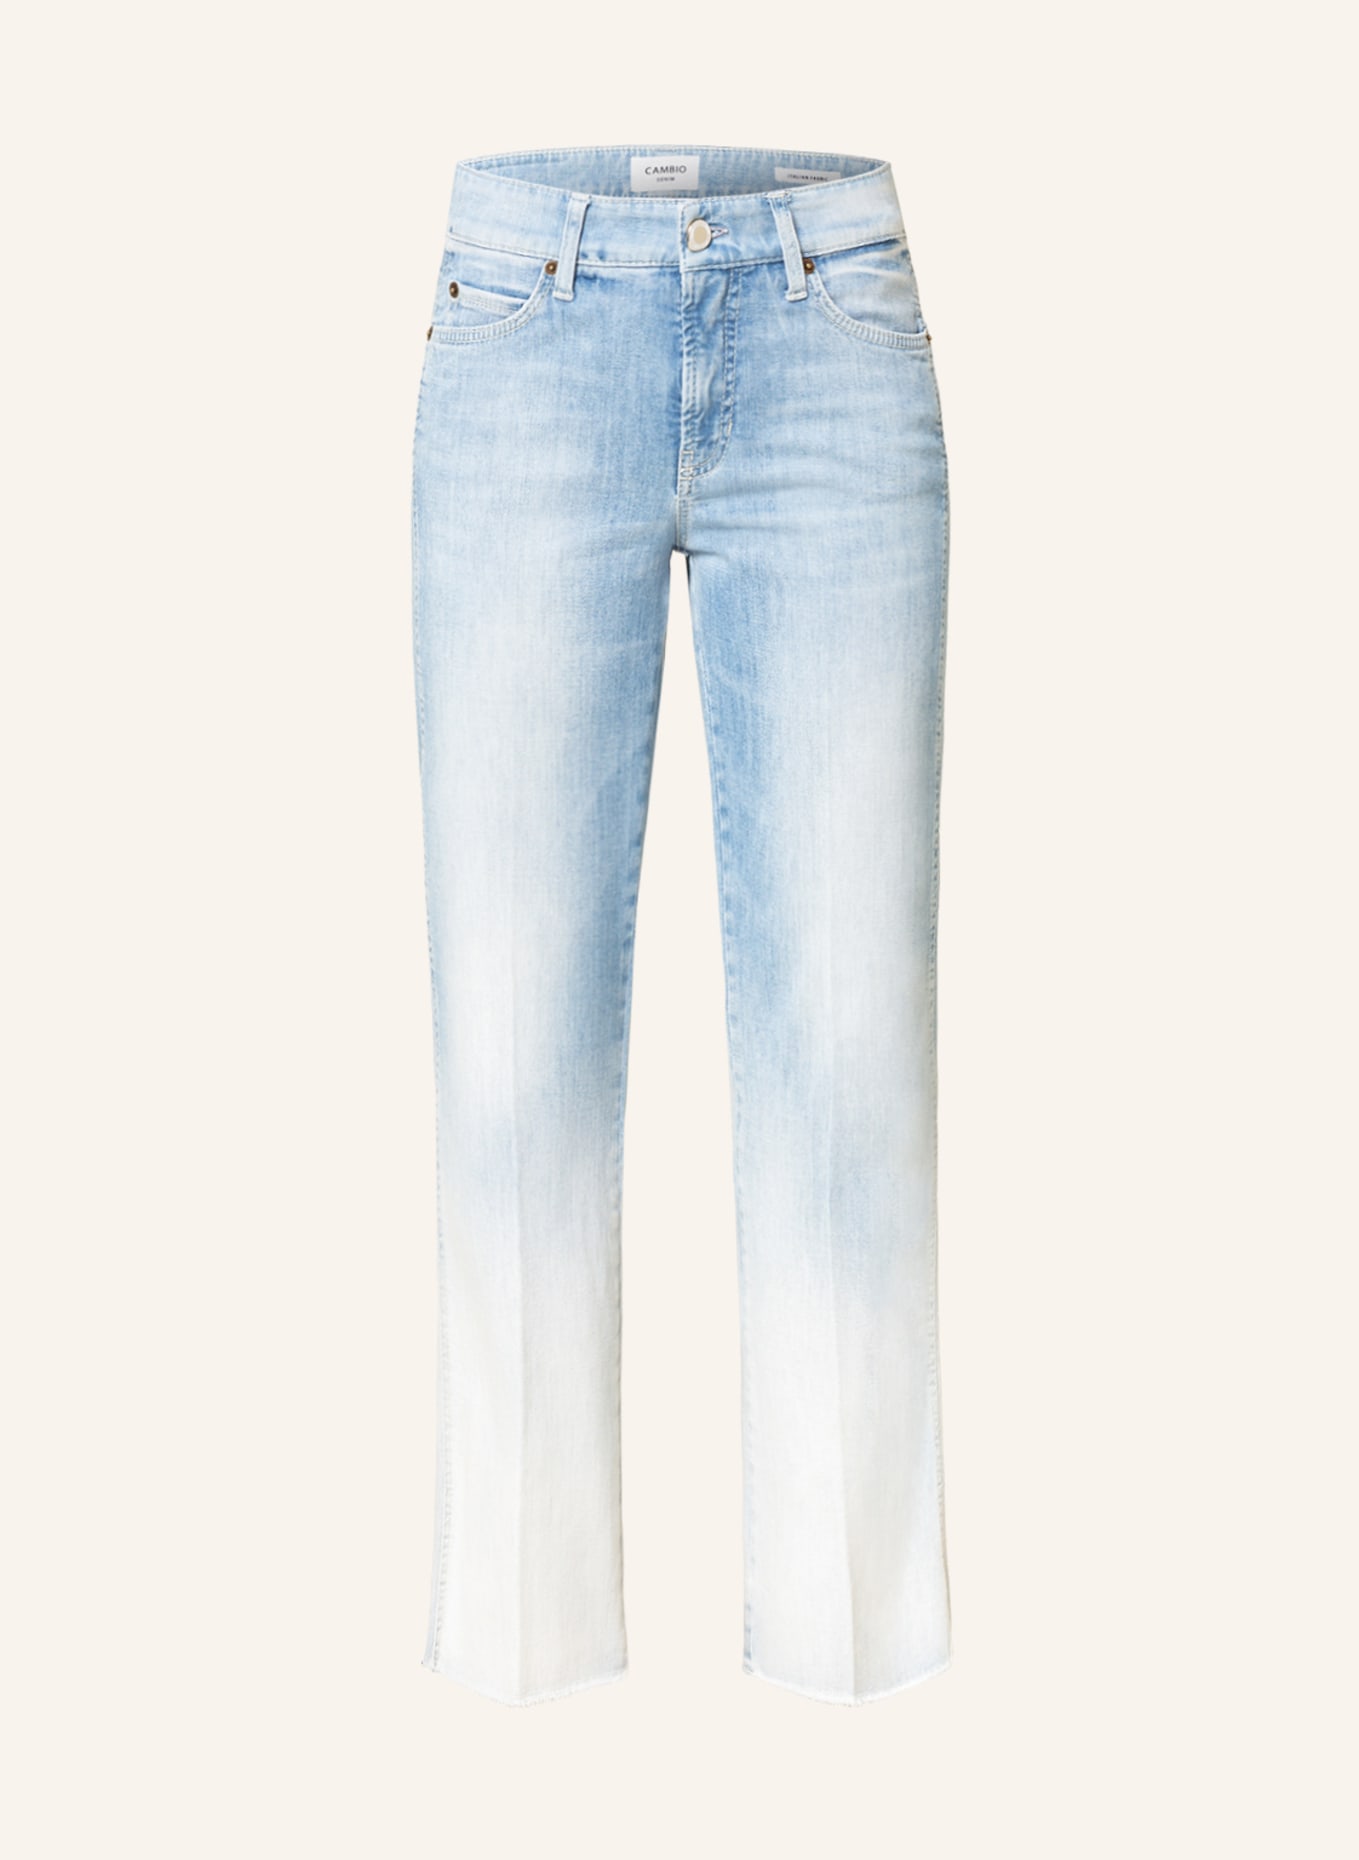 CAMBIO Bootcut jeans FRANCESCA, Color: 5323 summer degrade fringed he (Image 1)